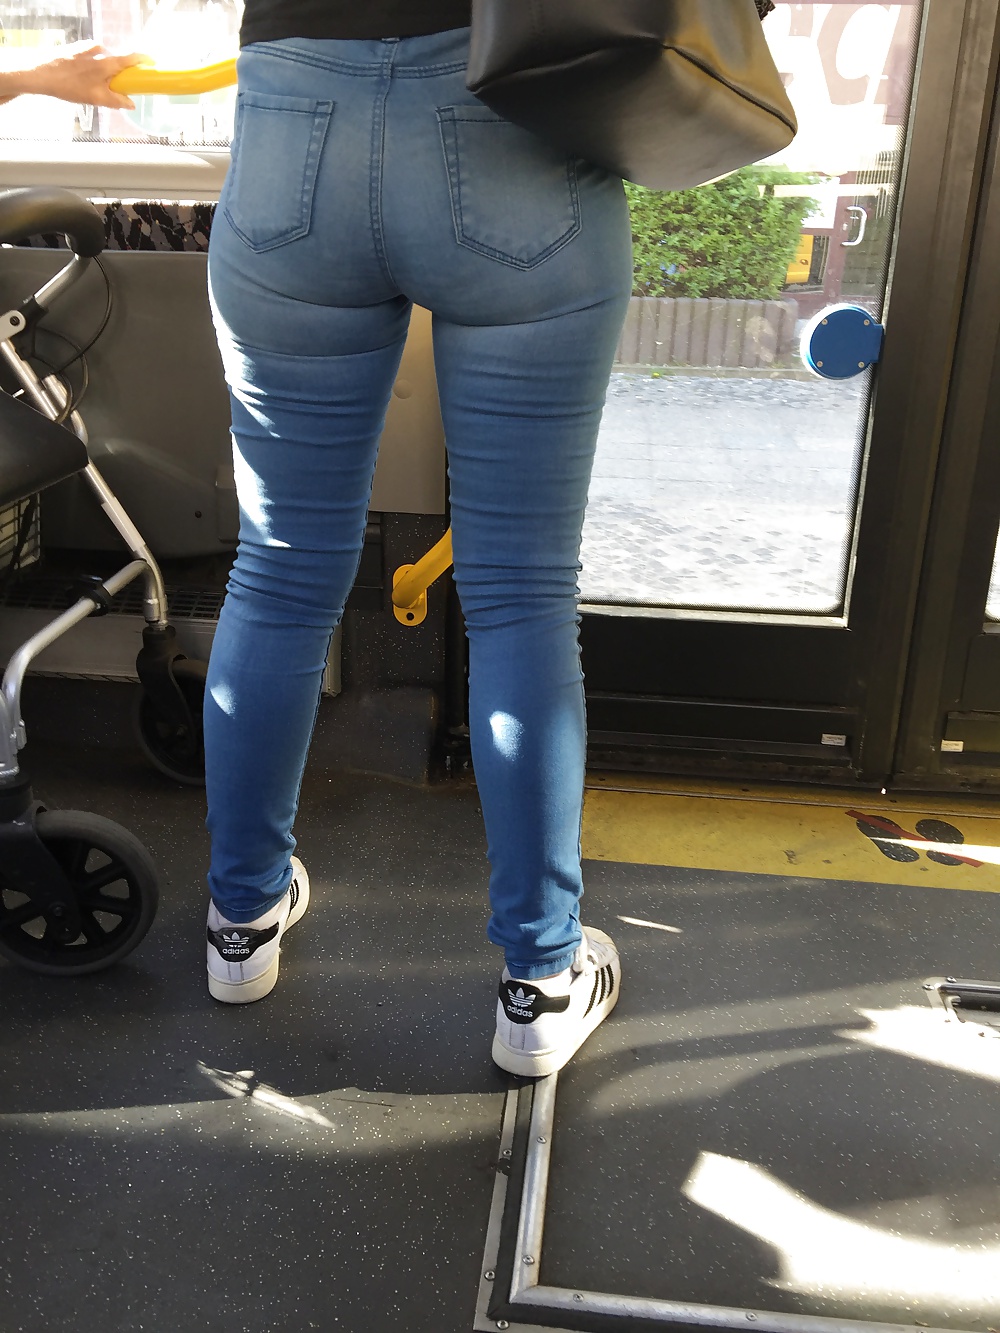 Sexy Ass in tight Jeans - Berlin Bus  (8/8)